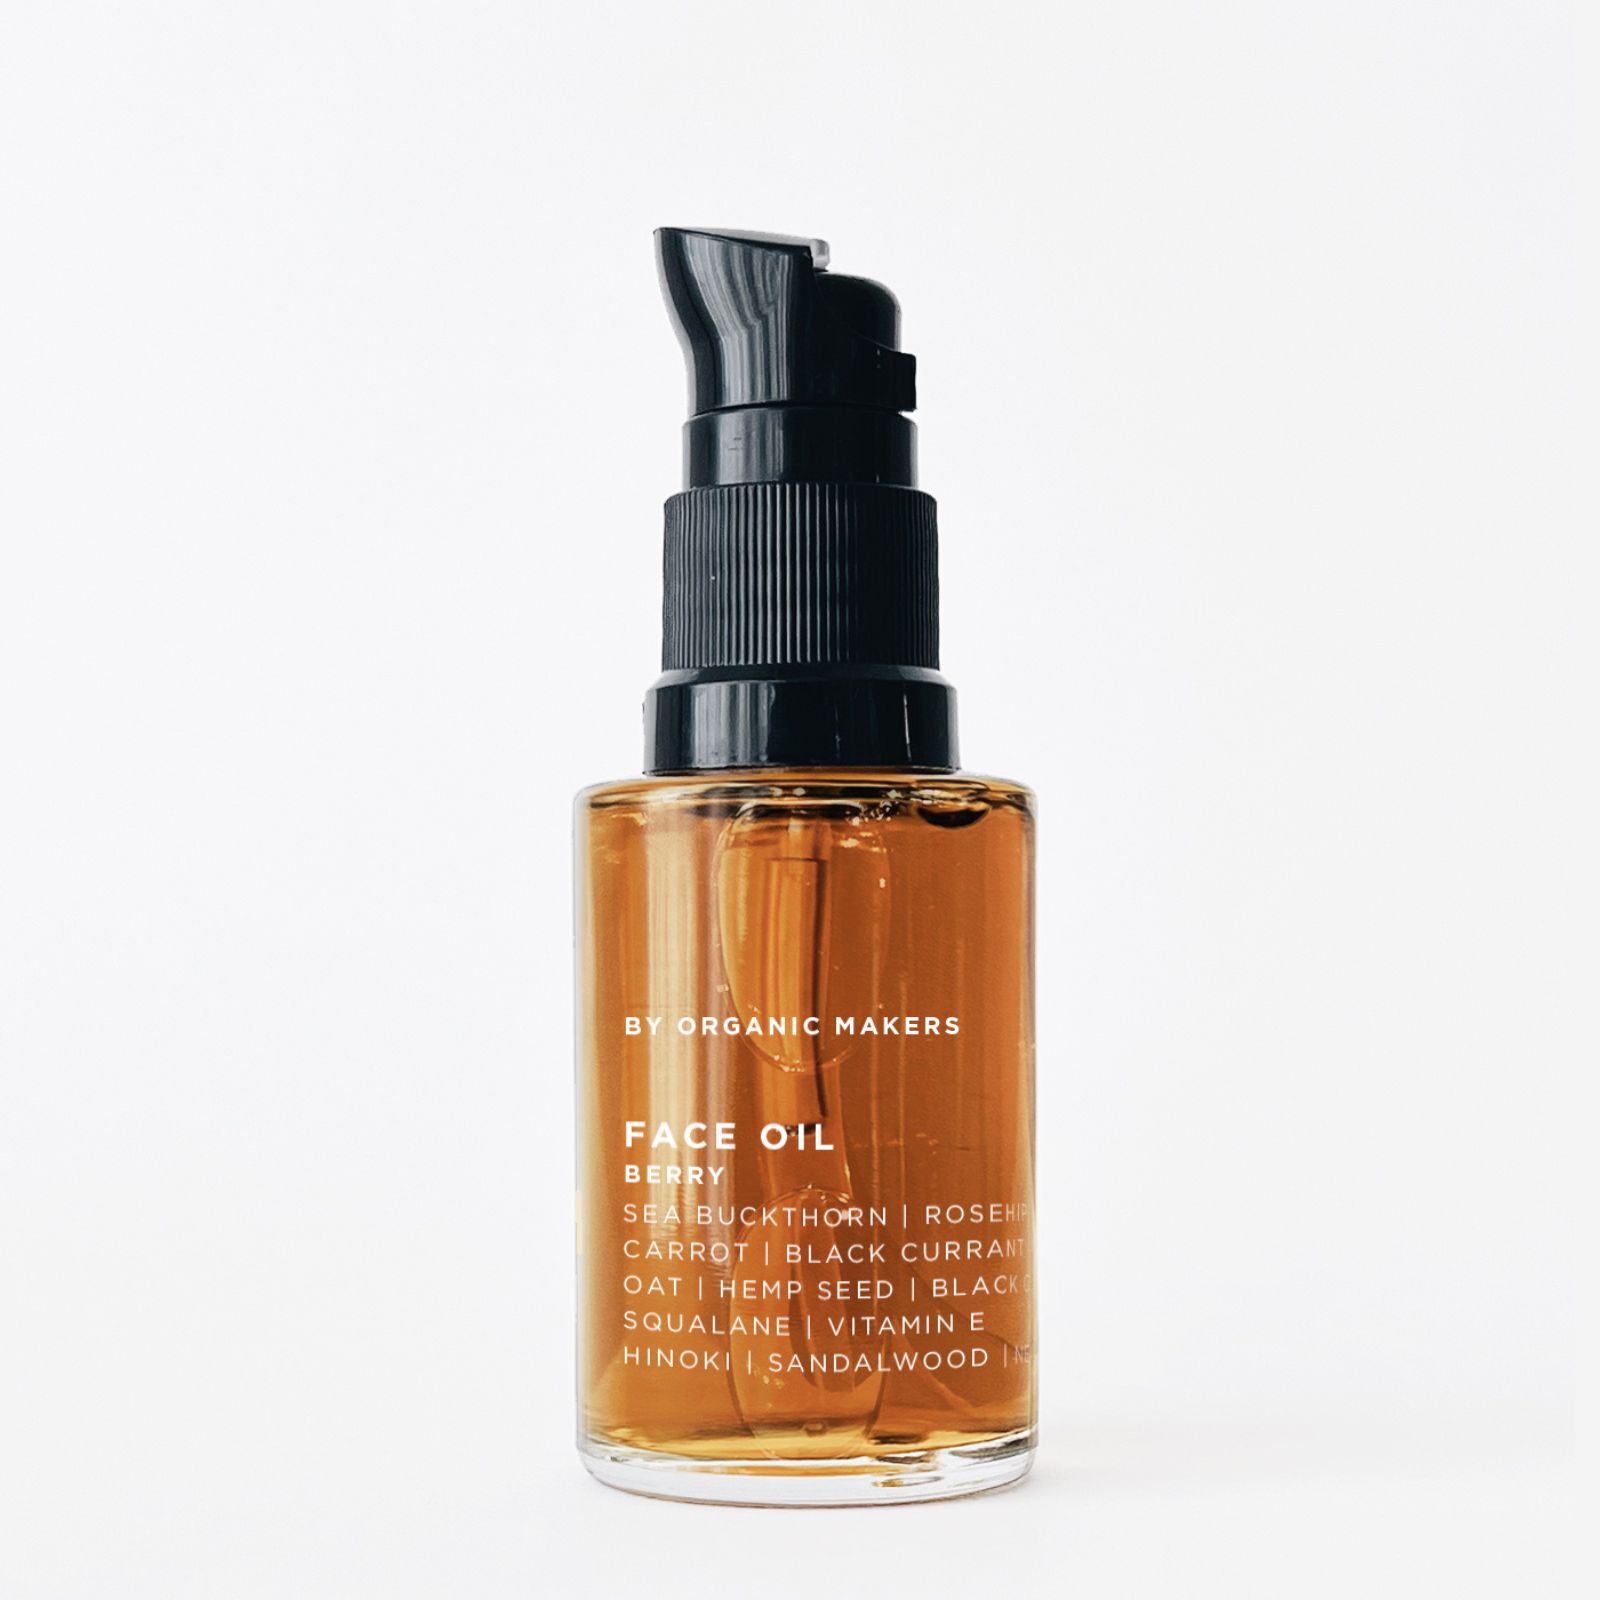 Face Oil Berry - By Organic Makers